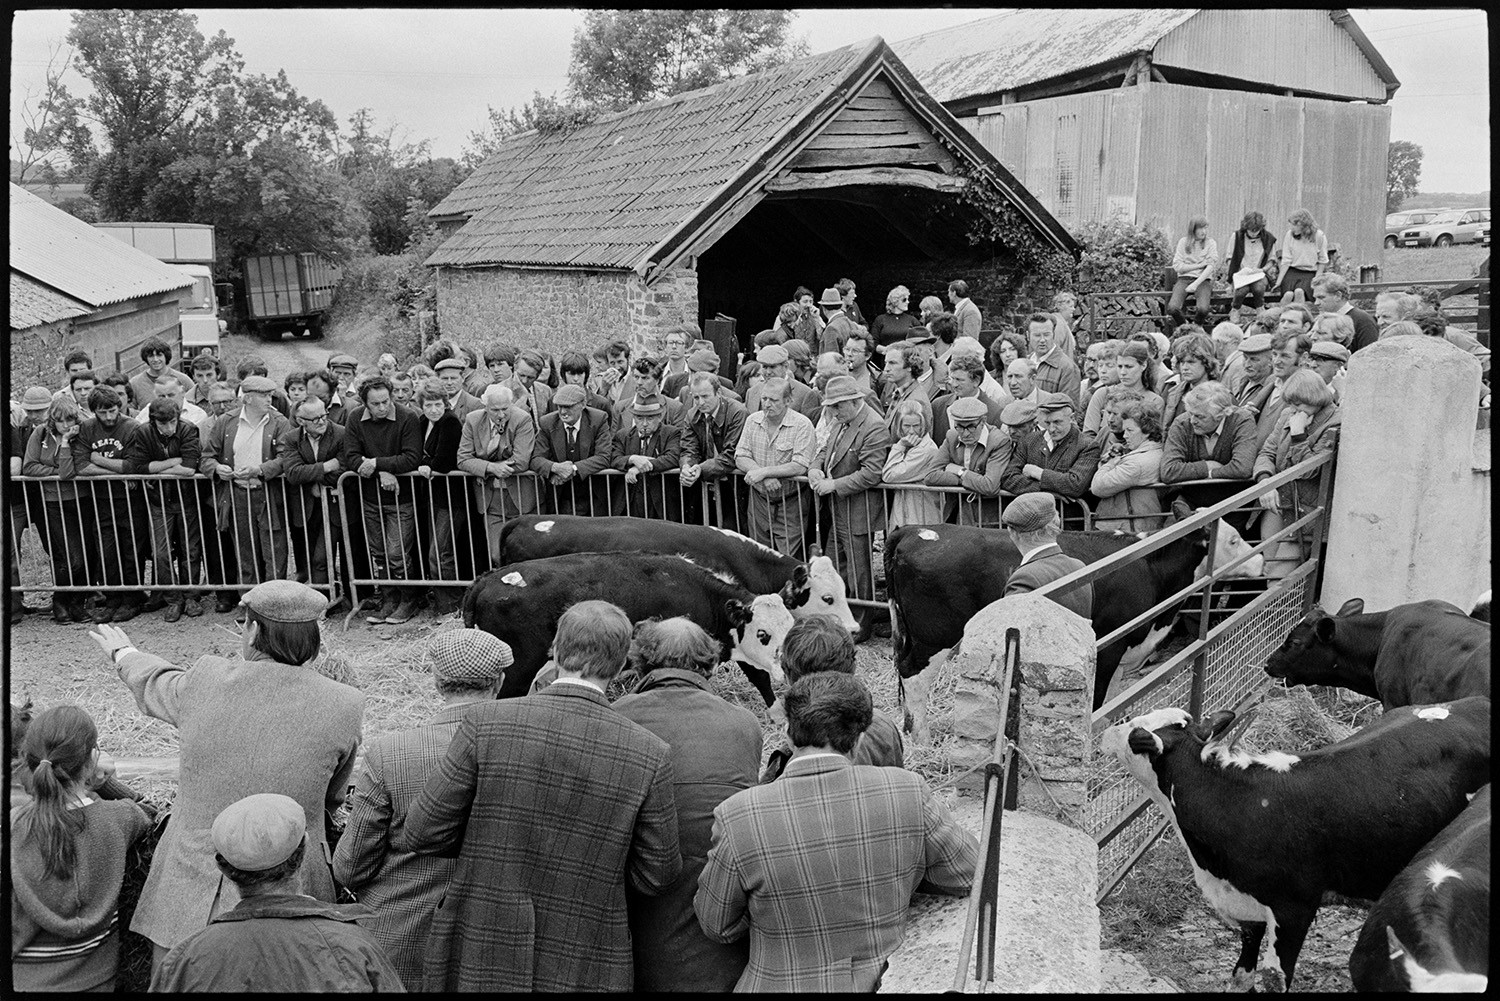 Cattle being auctioned at farm sale, crowd in farmyard. 
[Cattle in a makeshift pen being auctioned at a farm sale at Chapple, Dolton. A crowd is gathered around the pen and people are bidding. The auctioneer can be seen in the foreground pointing at bidders. Barns and three people sat on a gate can be seen in the background.]